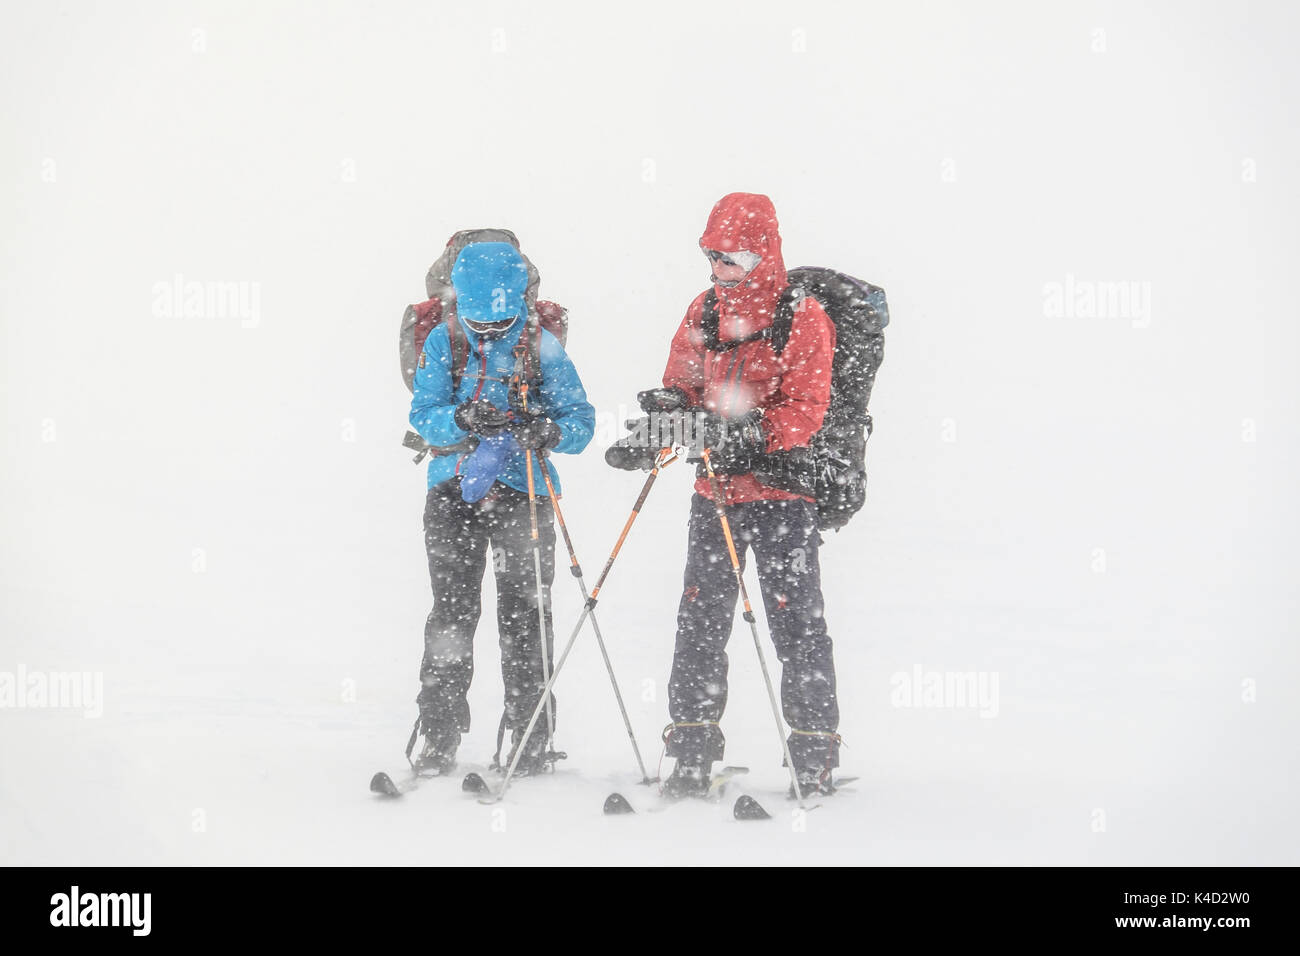 Two skiers trying to navigate in heavy falling snow, Norway Stock Photo